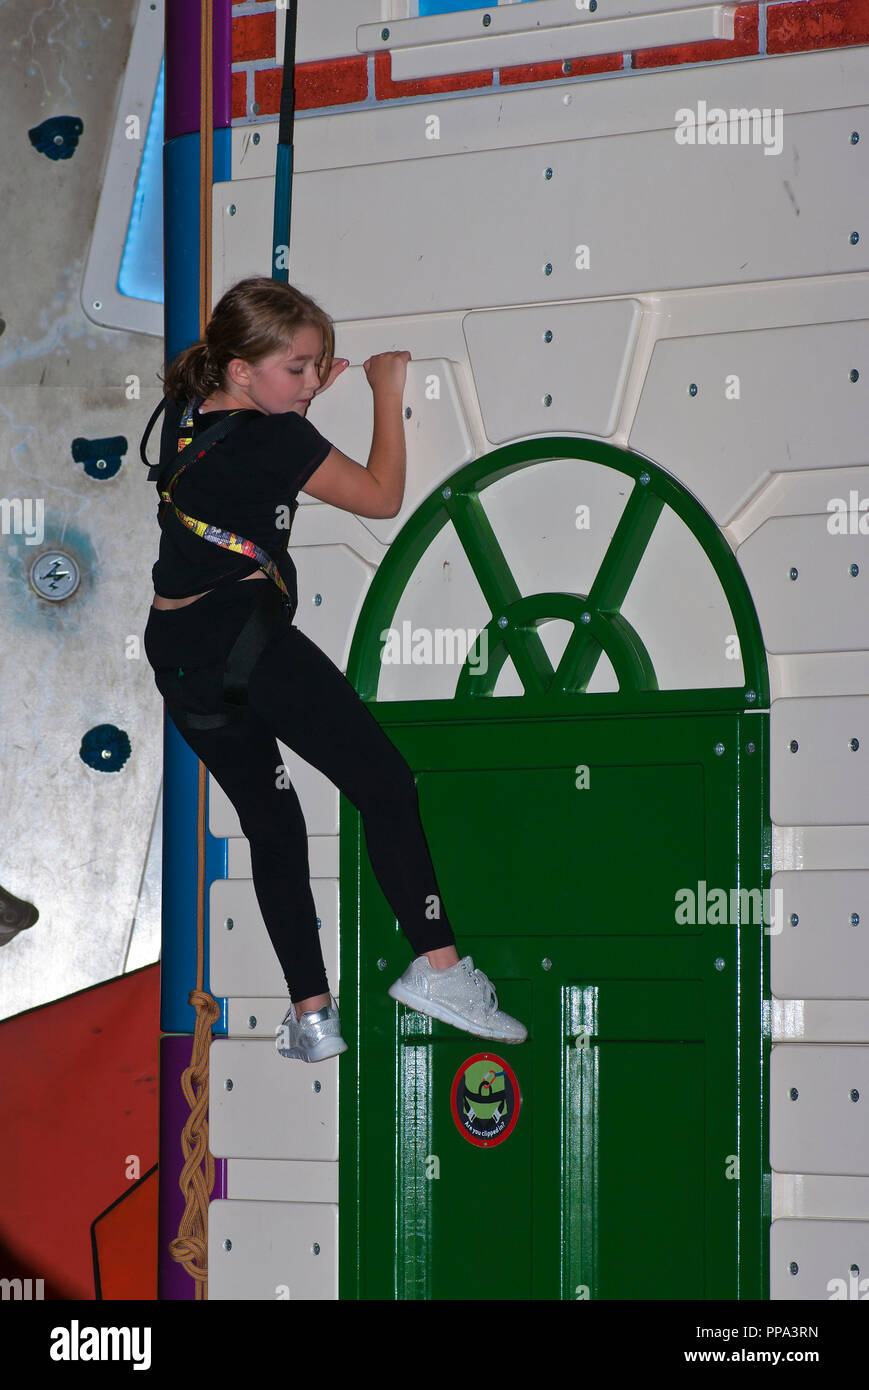 Young Girl Striving To Climb a Climbing Wall Secured By A Safety Harness Stock Photo